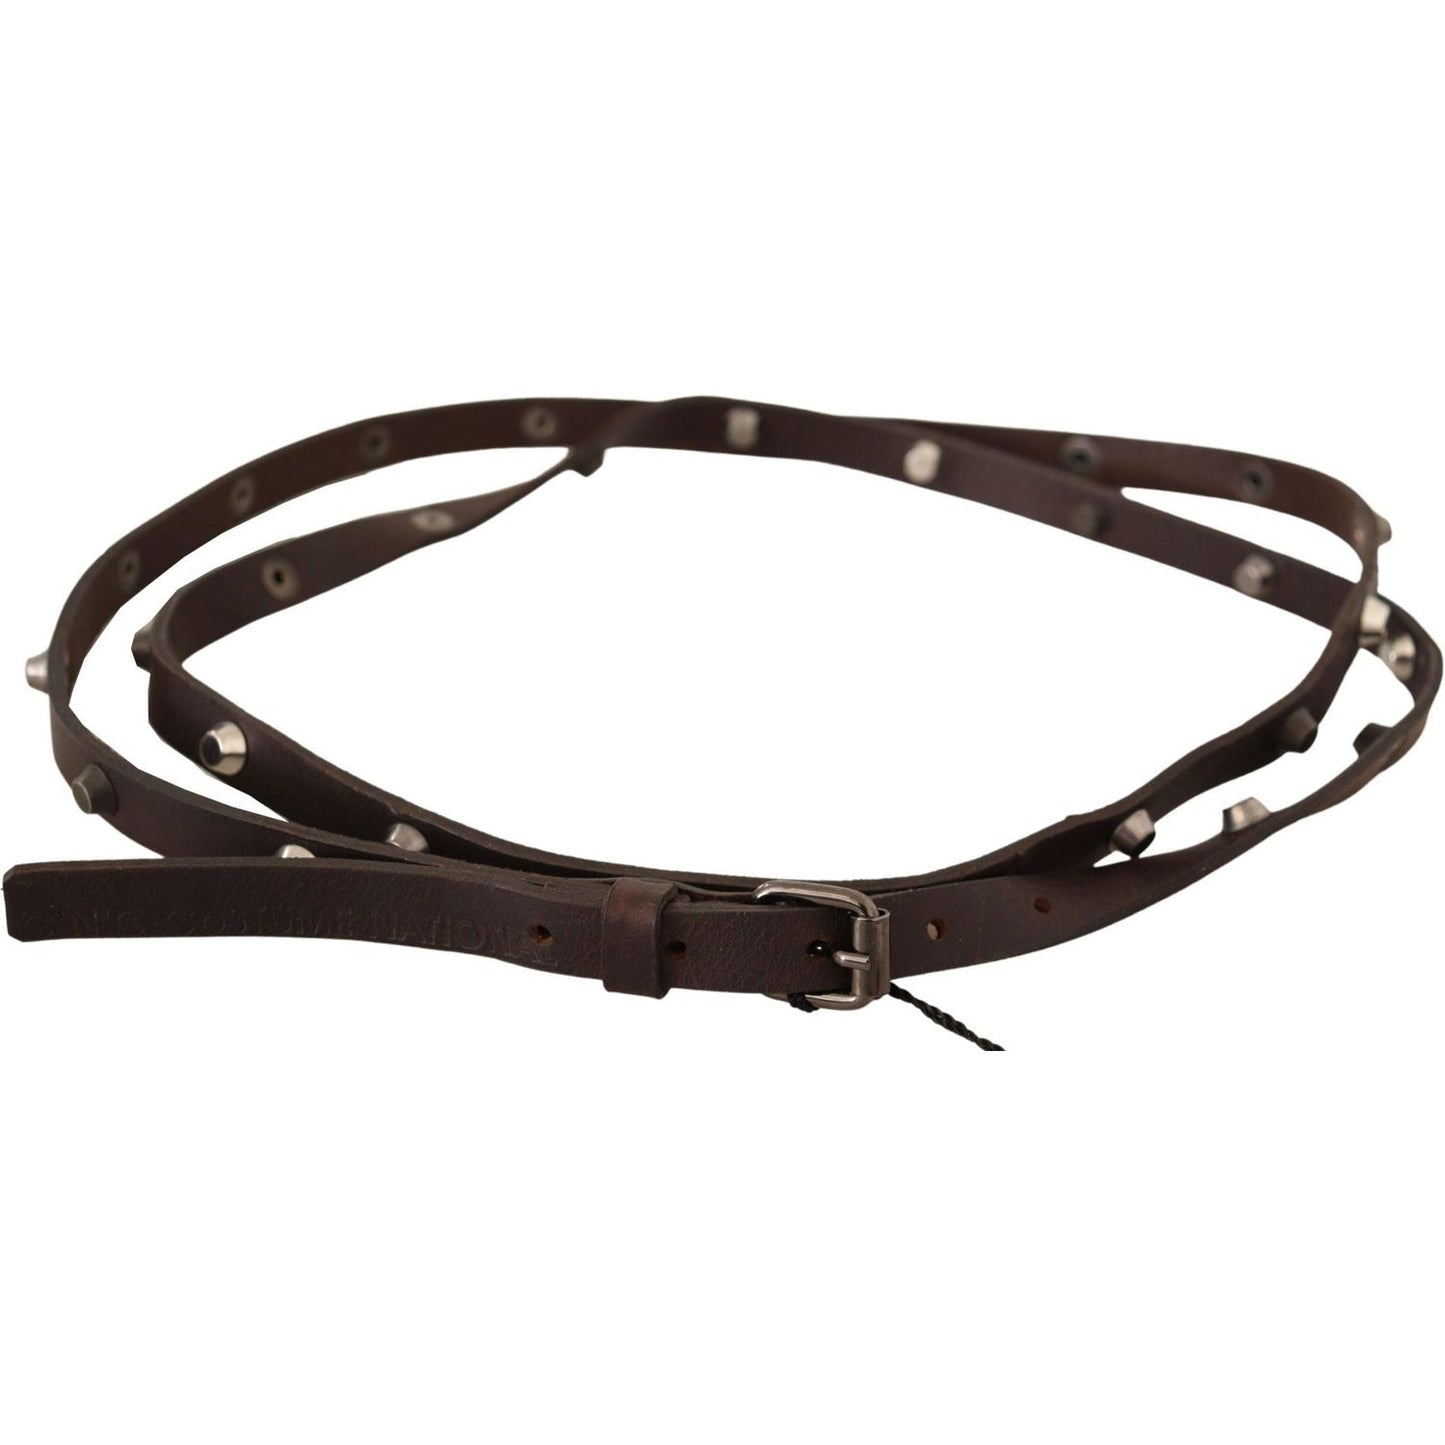 Costume National Chic Brown Leather Fashion Belt with Silver Buckle brown-leather-silver-tone-buckle-belt-1